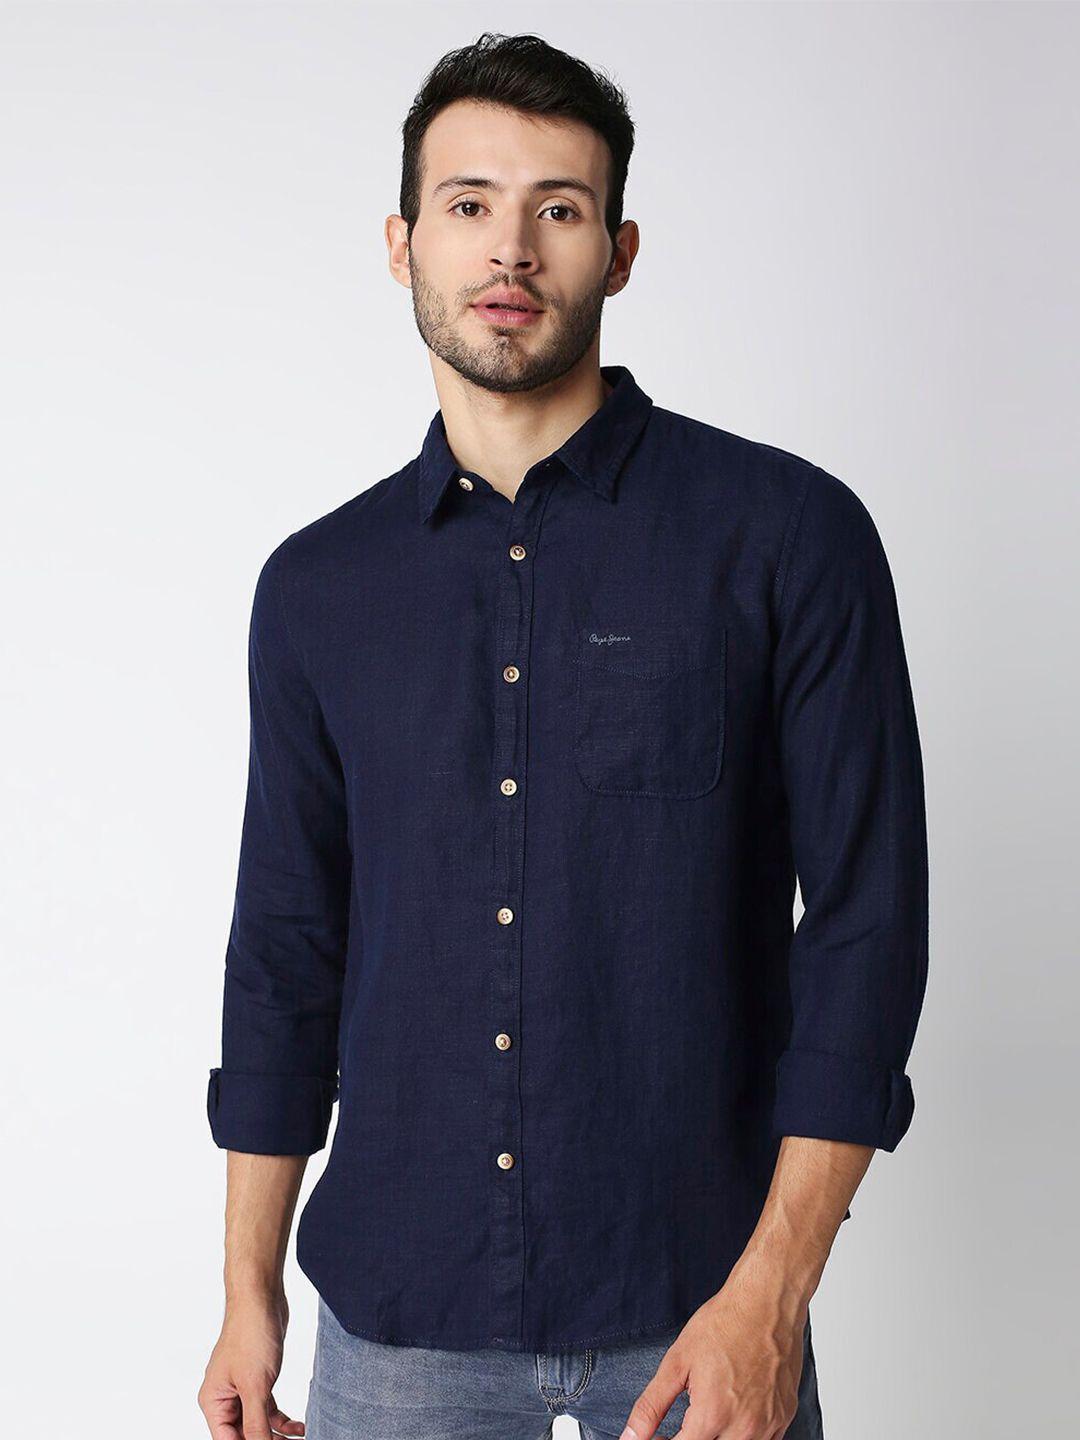 pepe-jeans-men-navy-blue-solid-casual-shirt